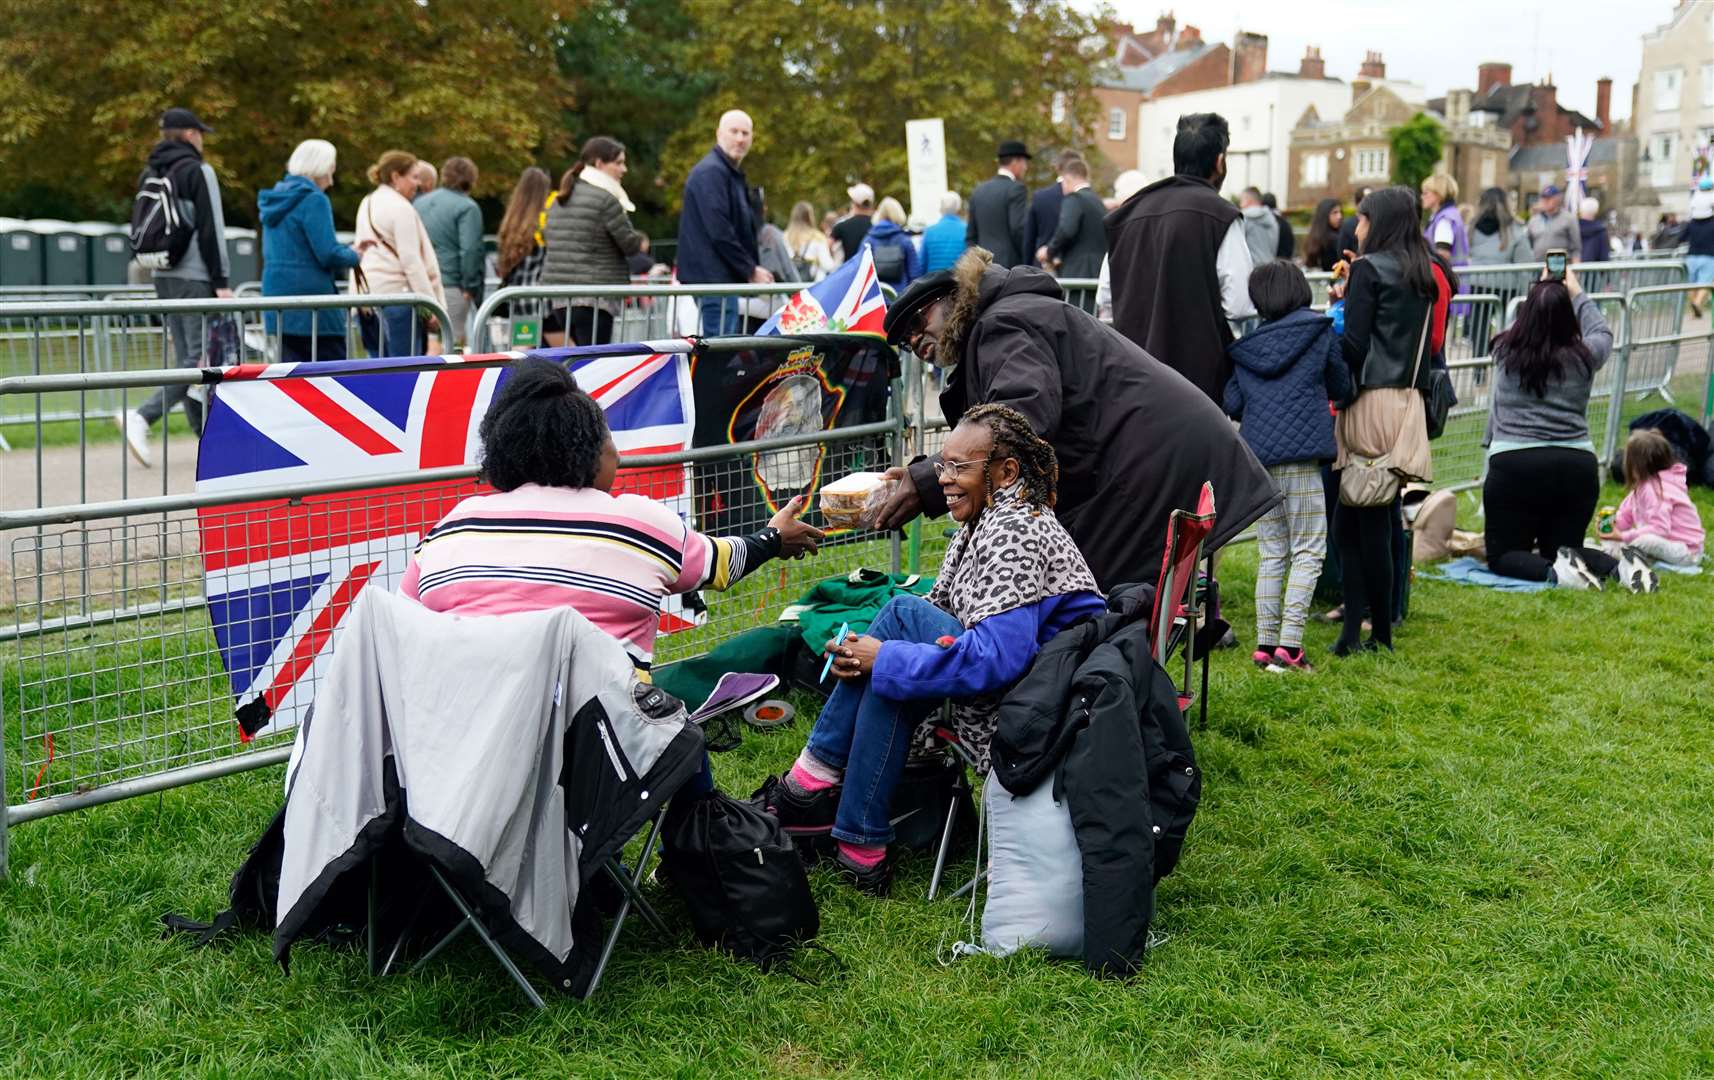 Members of the public set up chairs next to barriers on the procession route along the Long Walk in Windsor, Berkshire (Andrew Matthews/PA)